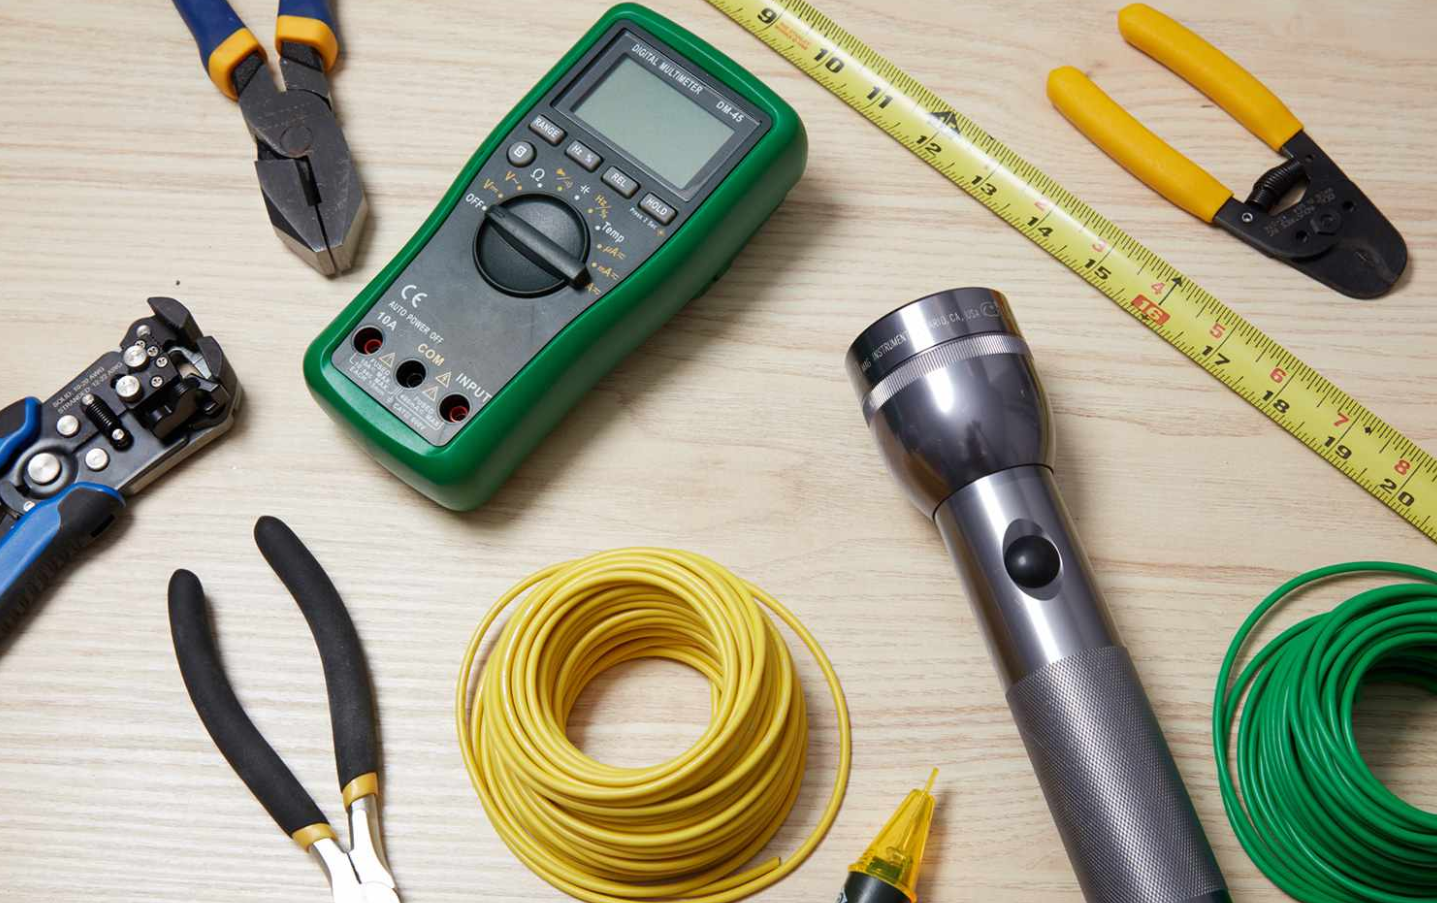 What tool is used to protect electrical installation cables?